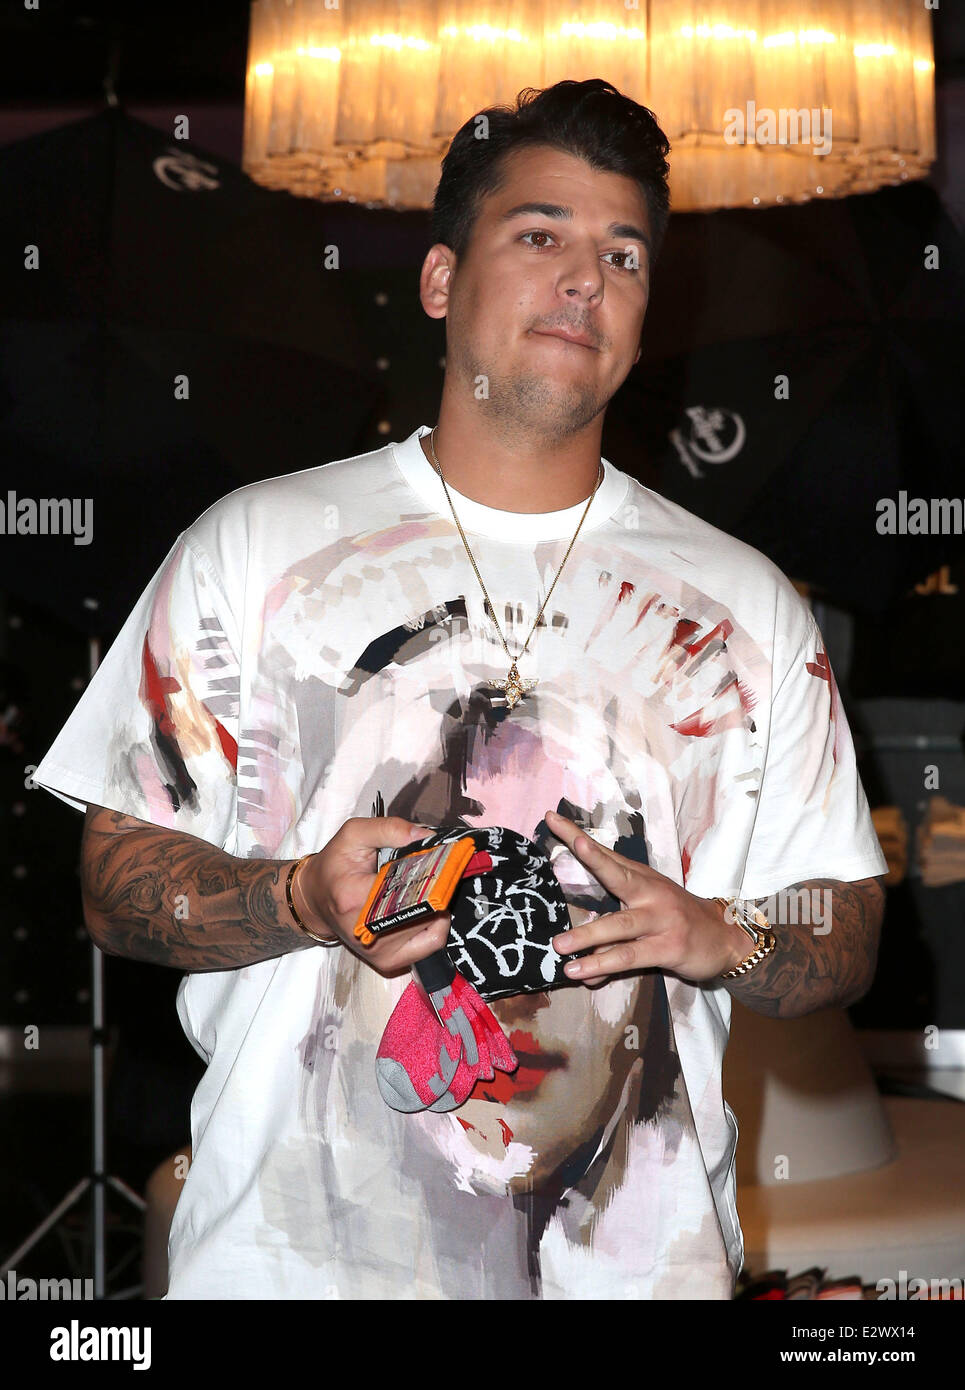 Rob Kardashian and his mother promote 'Arthur George by Robert Kardashian'  socks at Kardashian Khaos inside The Mirage Resort and Casino Featuring: Rob  Kardashian Where: Las Vegas, Nevada, United States When: 16